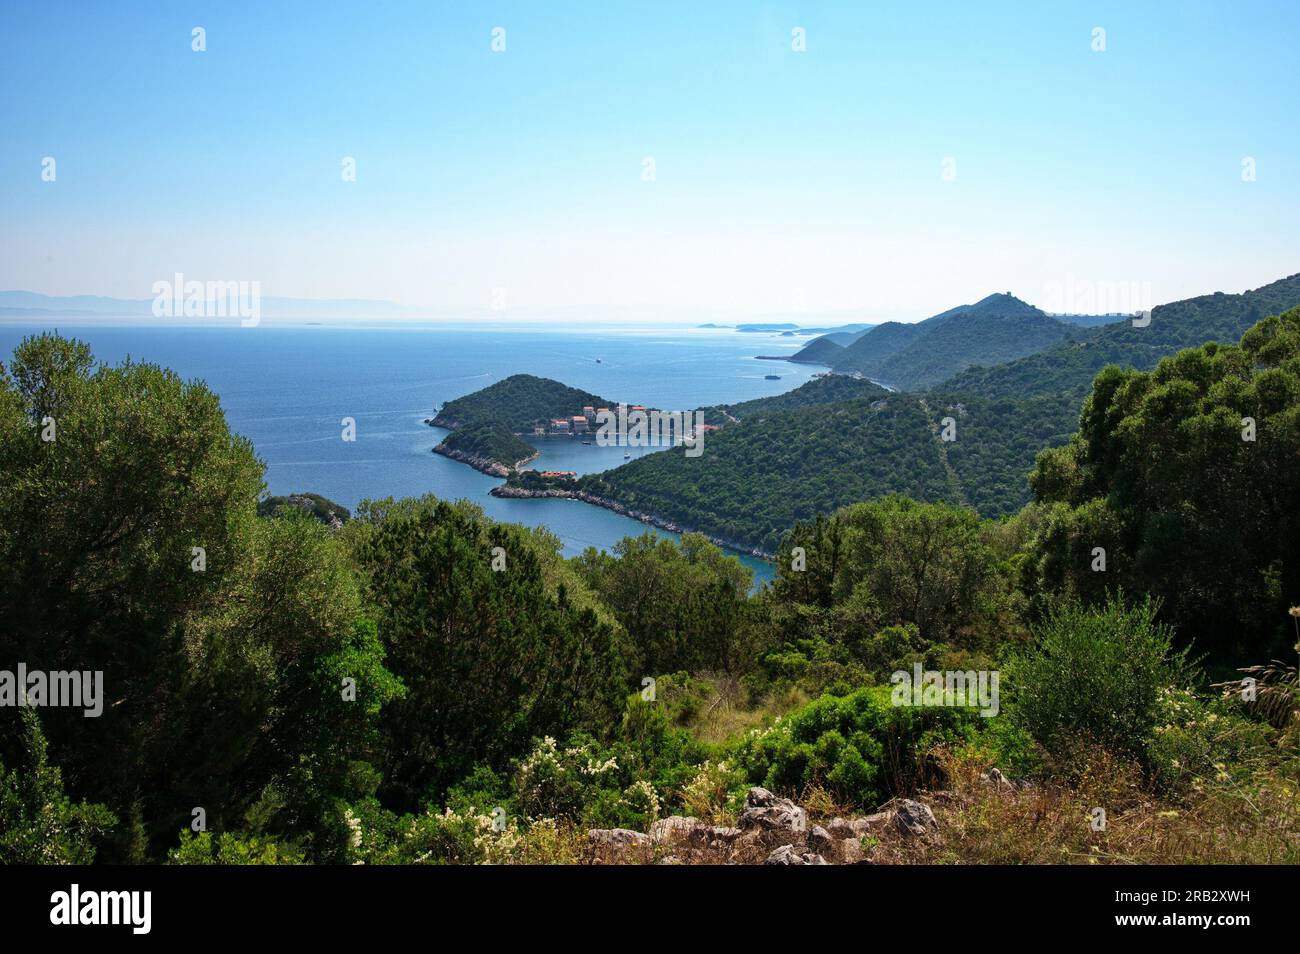 Scenic view of island Lastovo, Croatia from the top of a hill Stock Photo